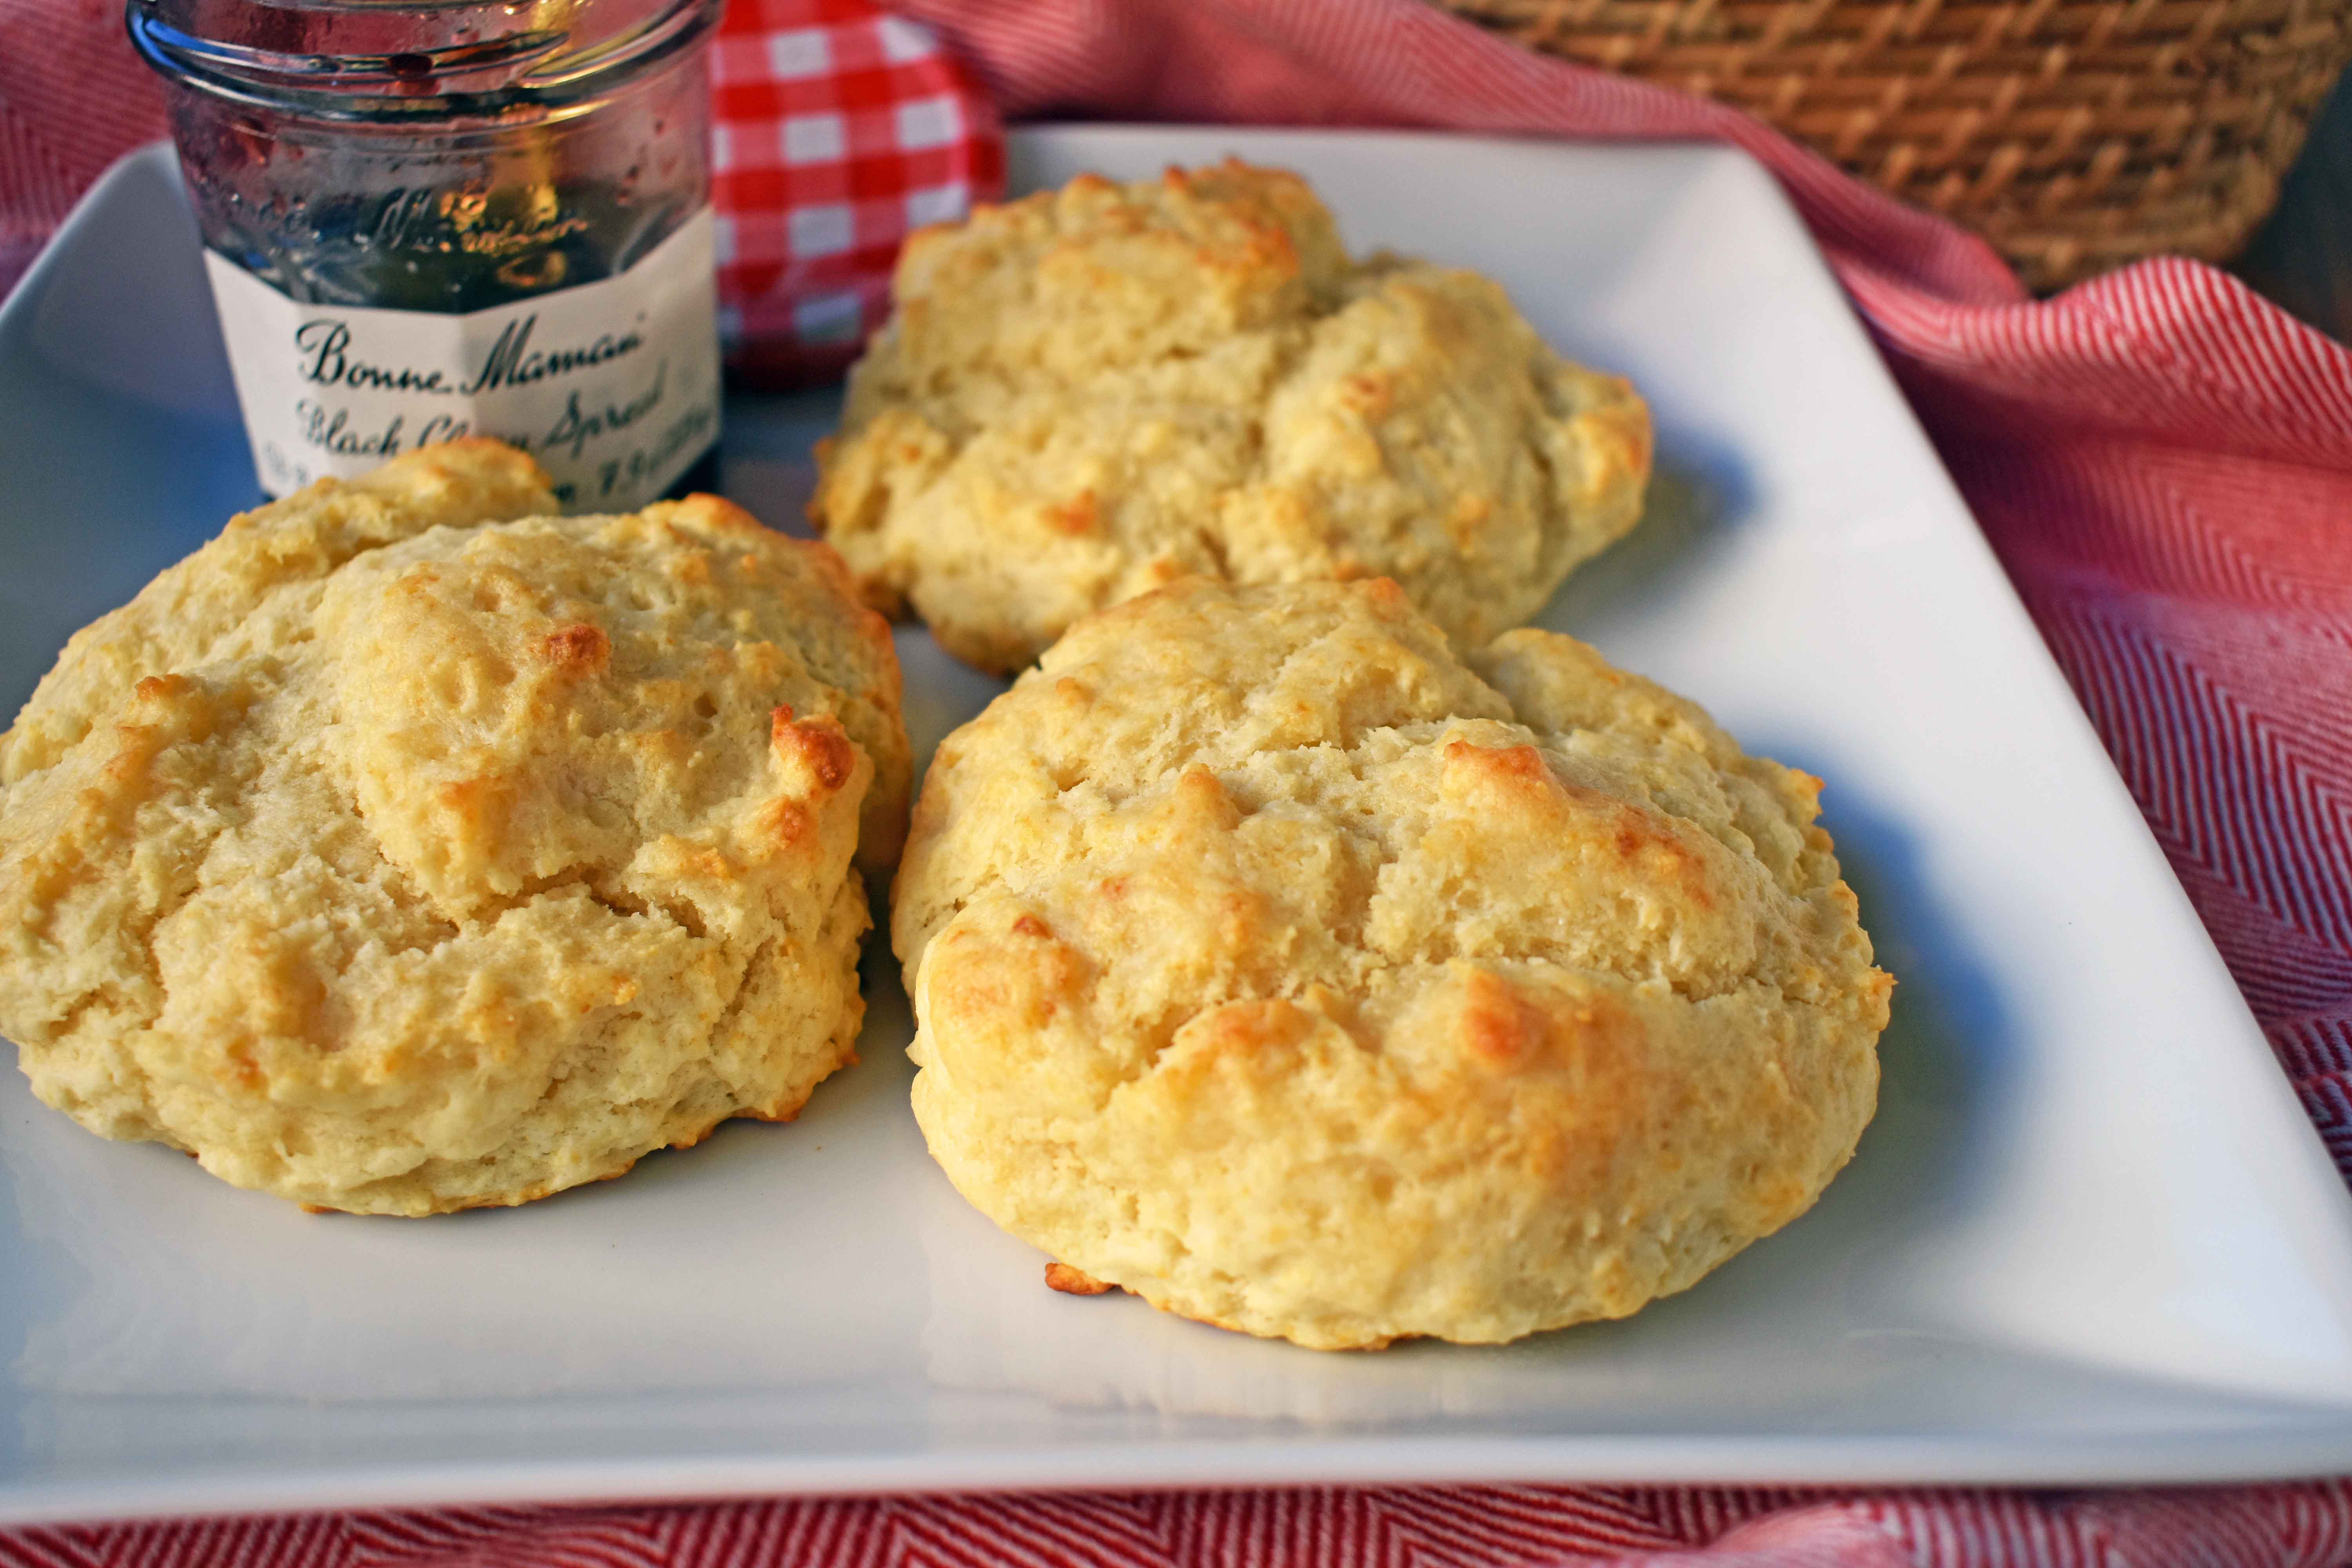 Easy Buttermilk Drop Biscuits. Homemade buttery, flaky biscuits made in less than 20 minutes. A tender, made from scratch biscuit with a crispy outer crust that is super simple to make. www.modernhoney.com